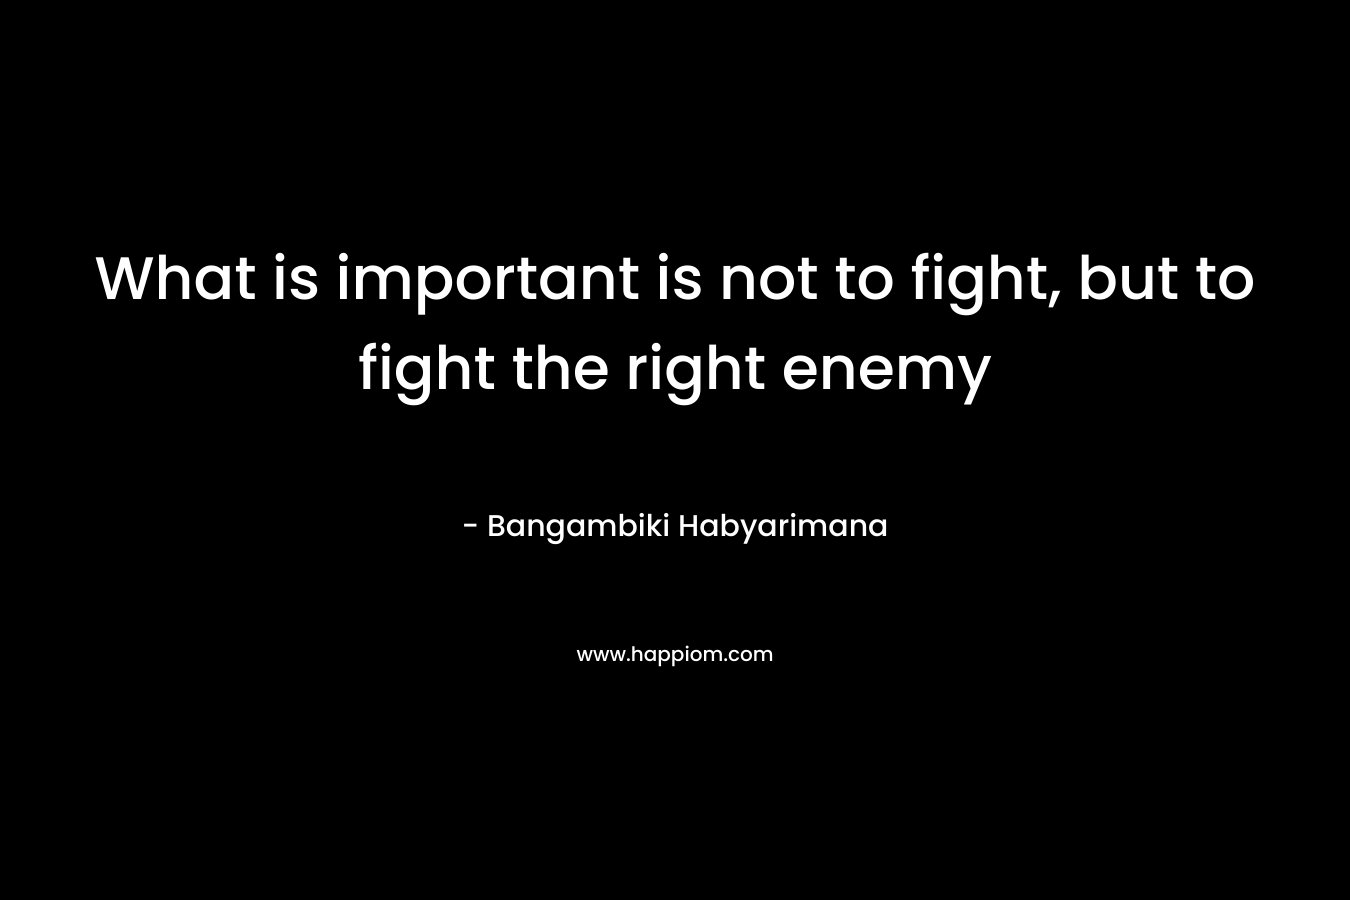 What is important is not to fight, but to fight the right enemy